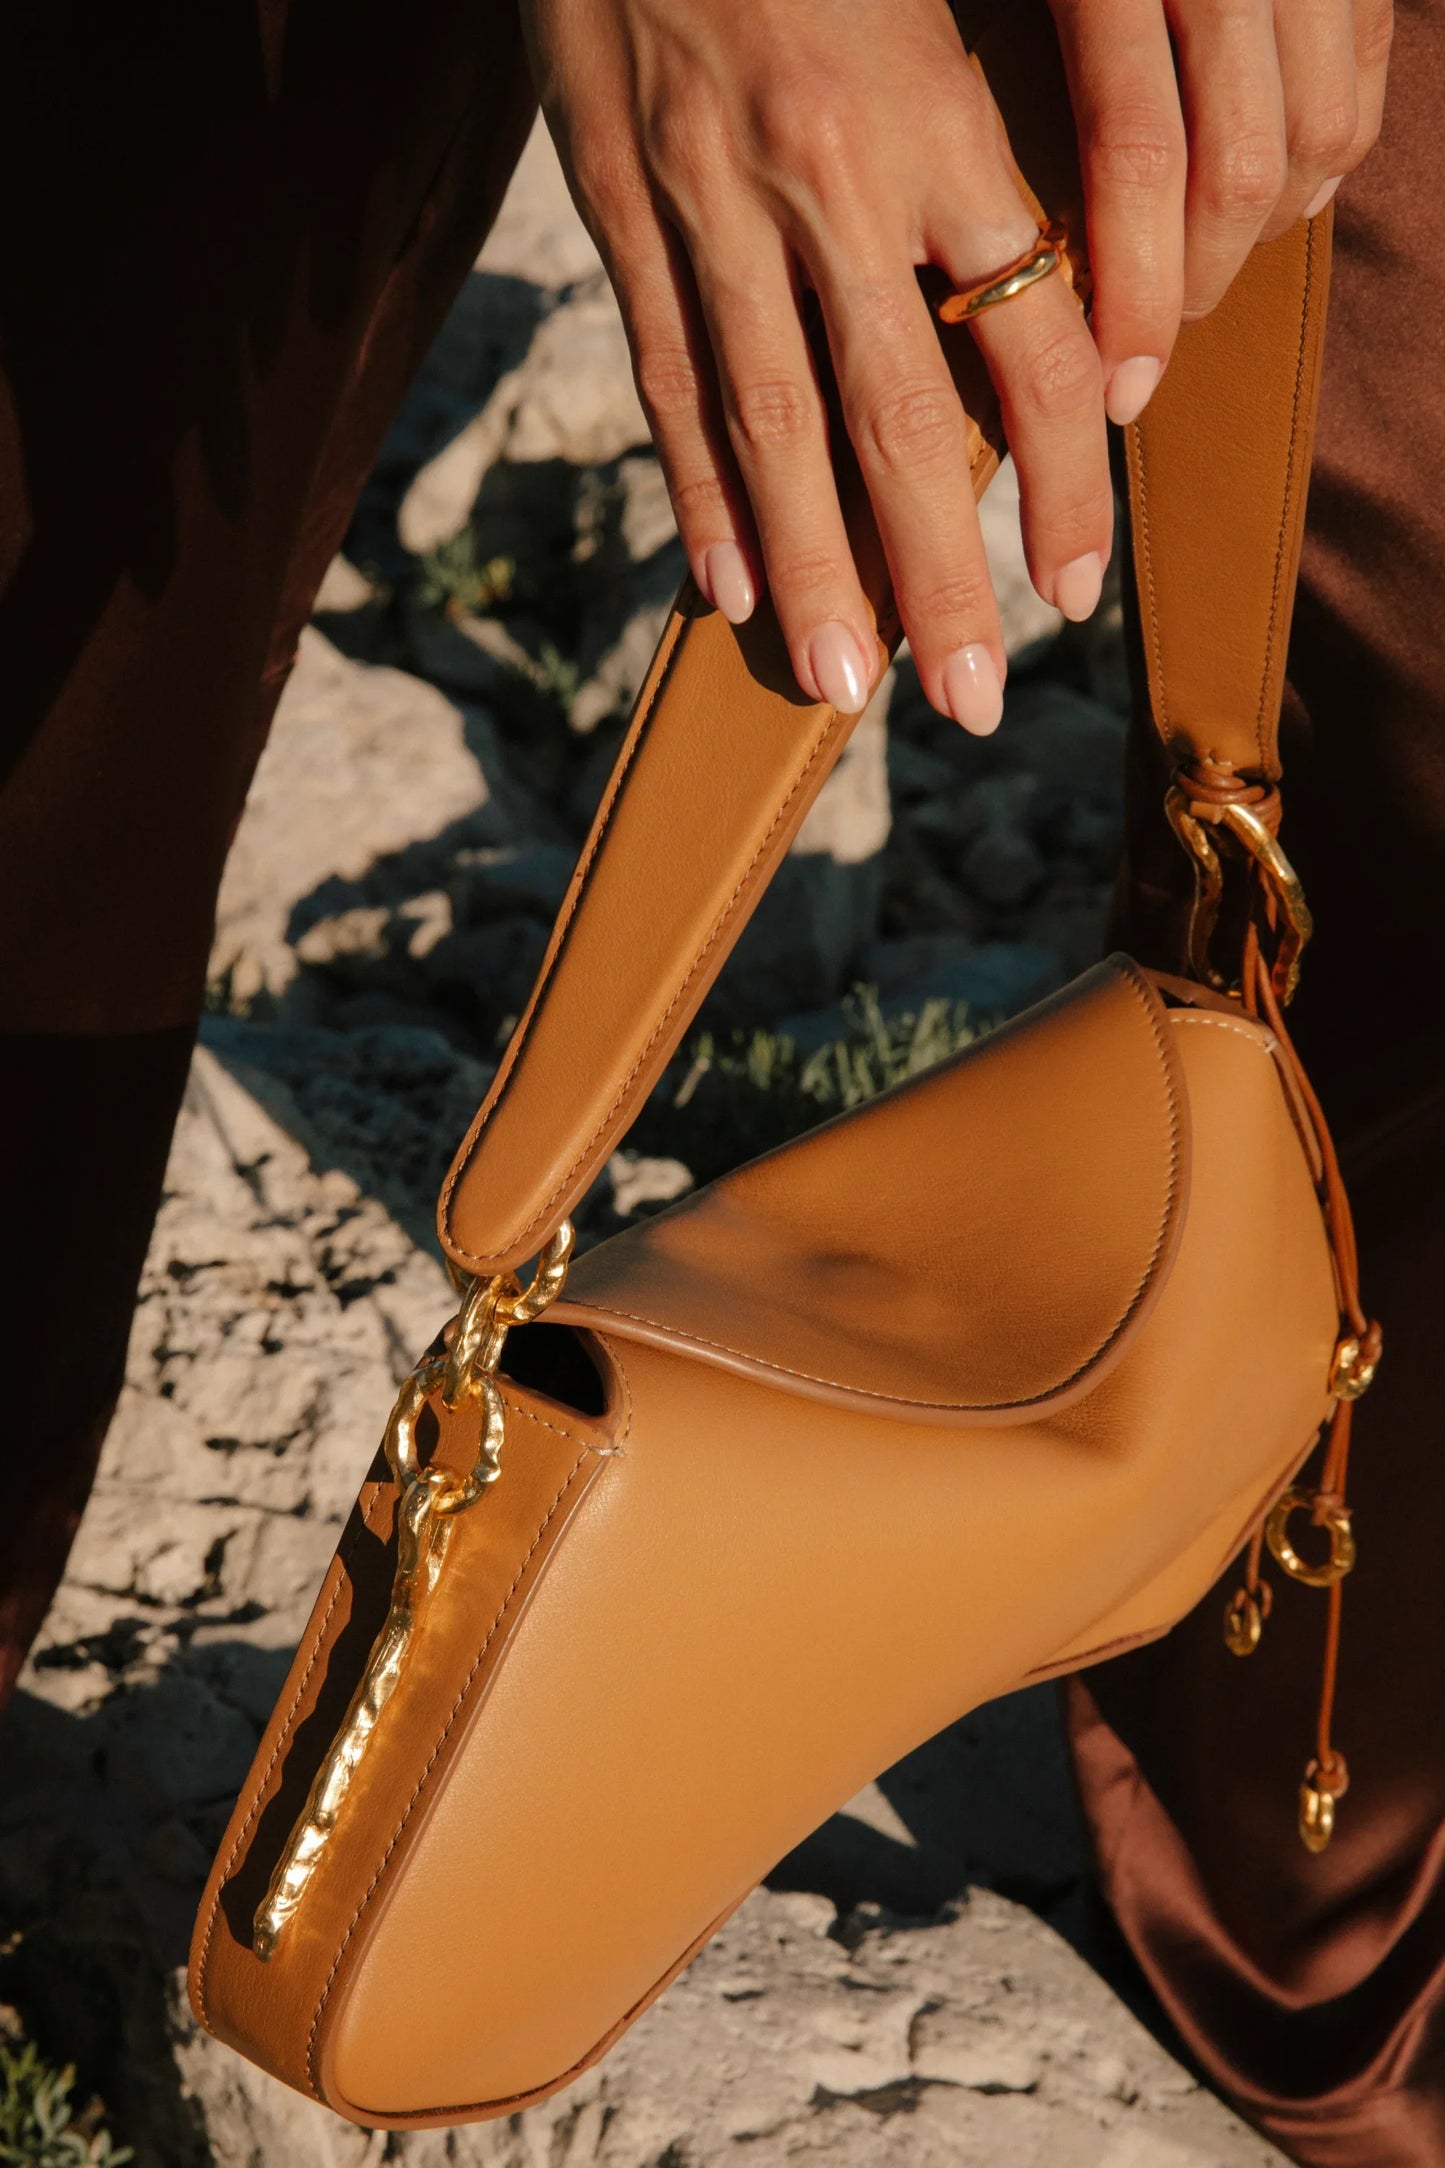  Deià handmade Nappa Leather Shoulder bag with Hanging Organic Rings senderkis caramel side view